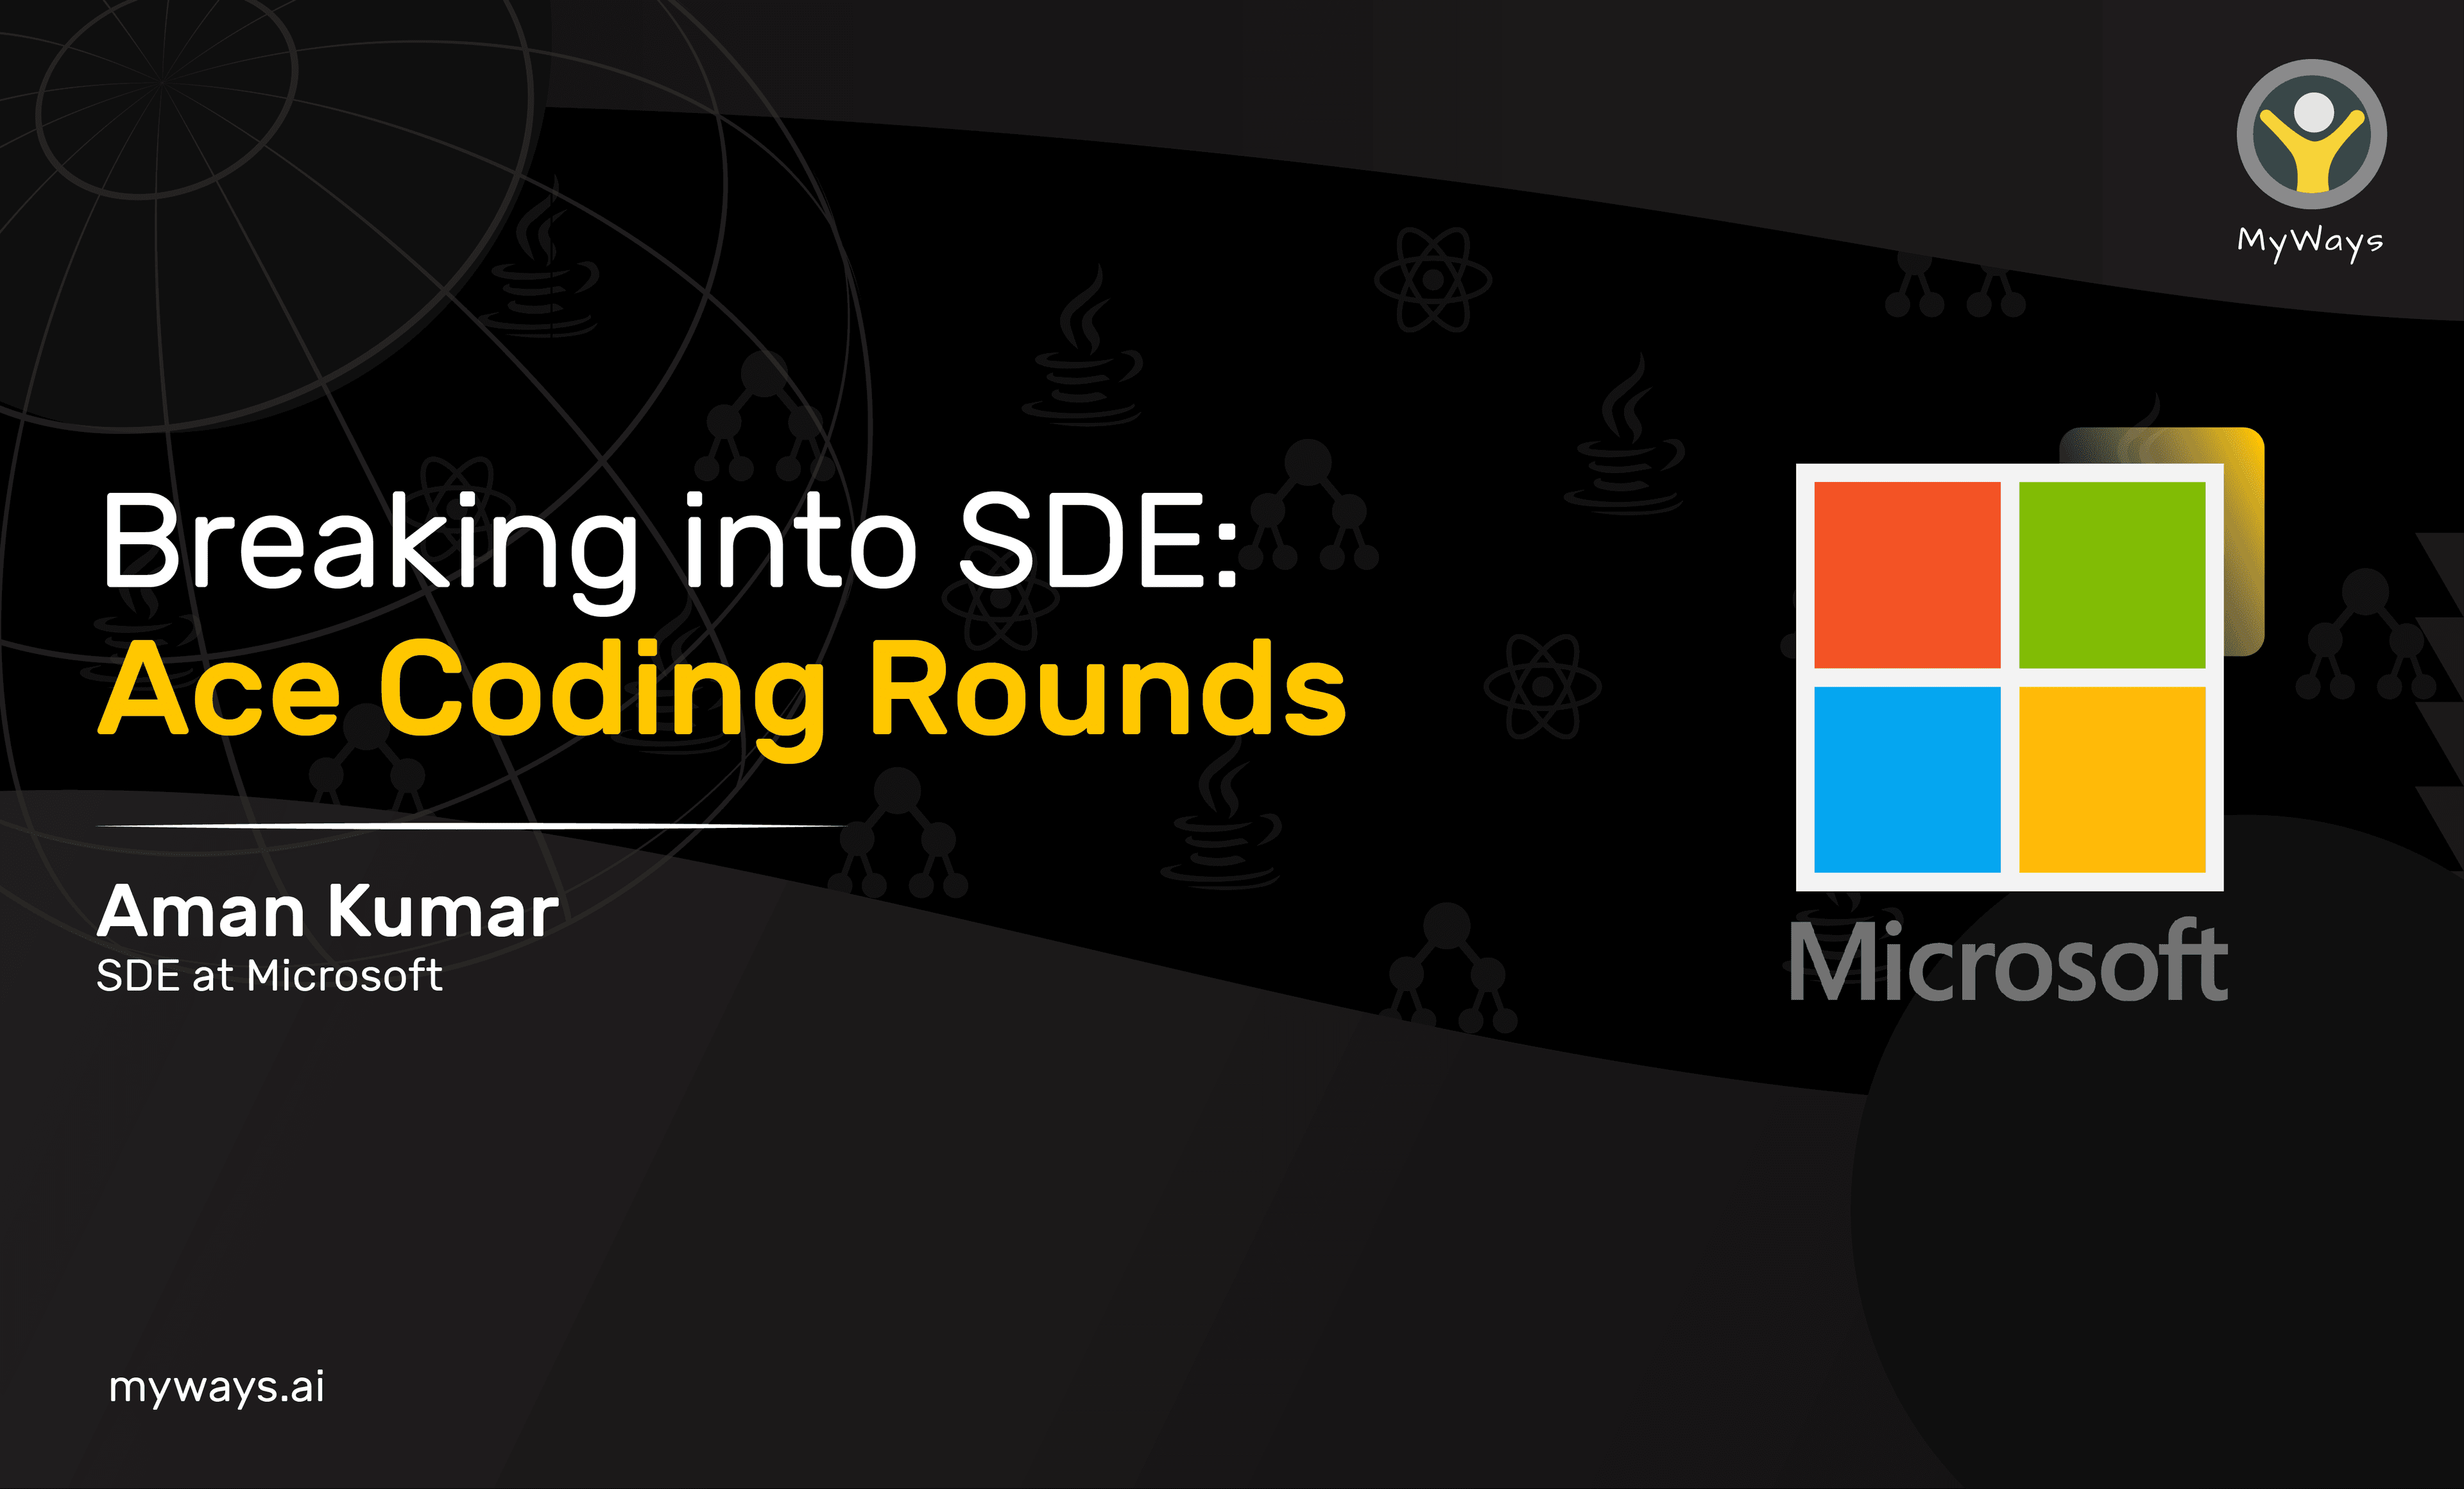 Breaking into SDE: Ace Coding Round